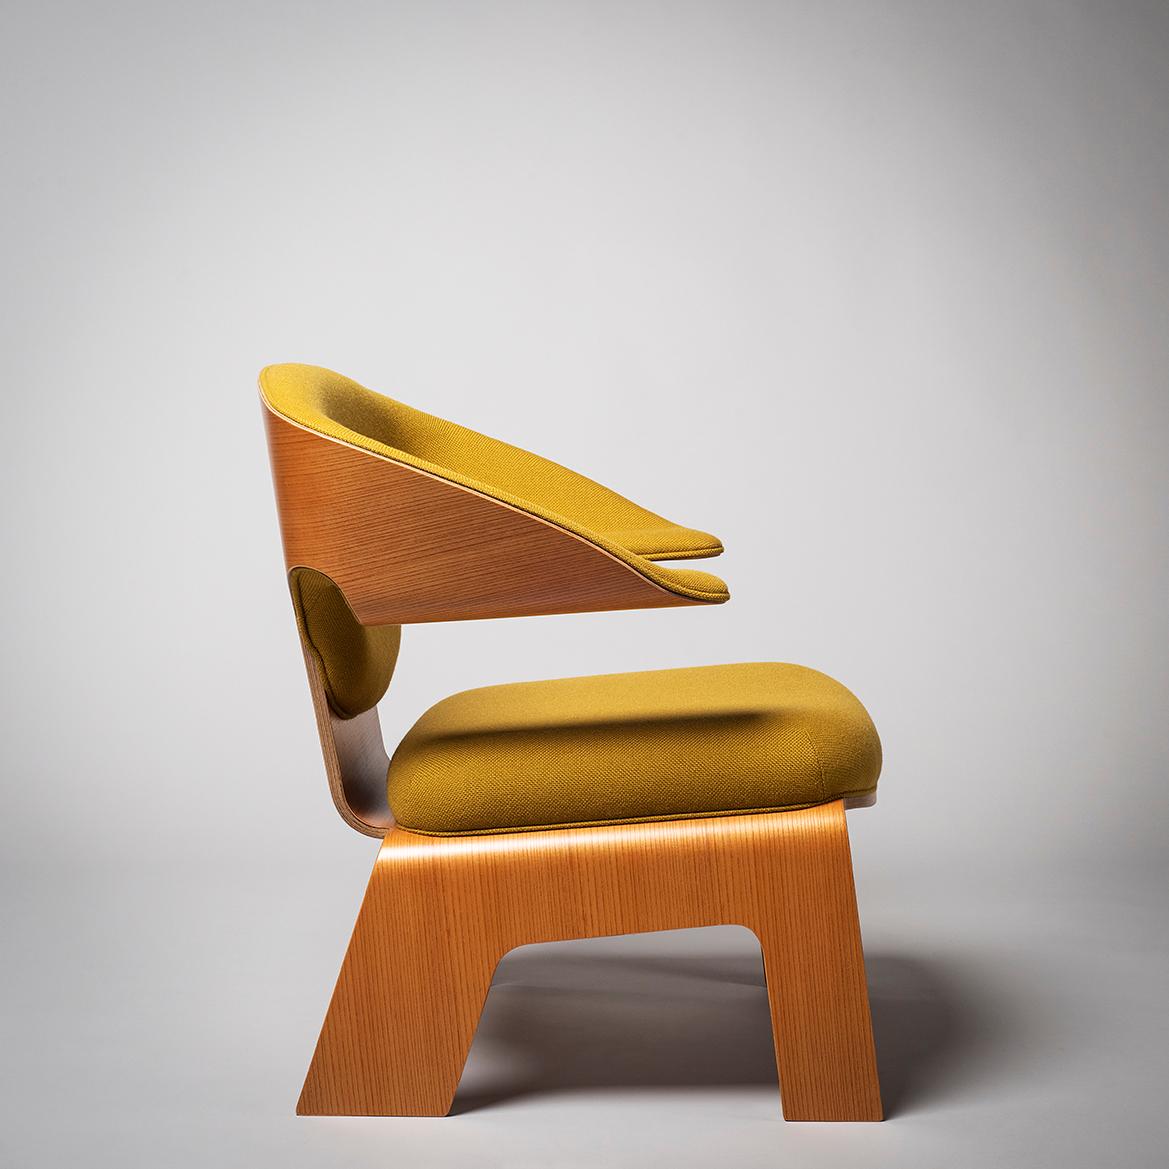 Japanese Lounge Chair Kenzo Tange for Sumi Memorial, 1955